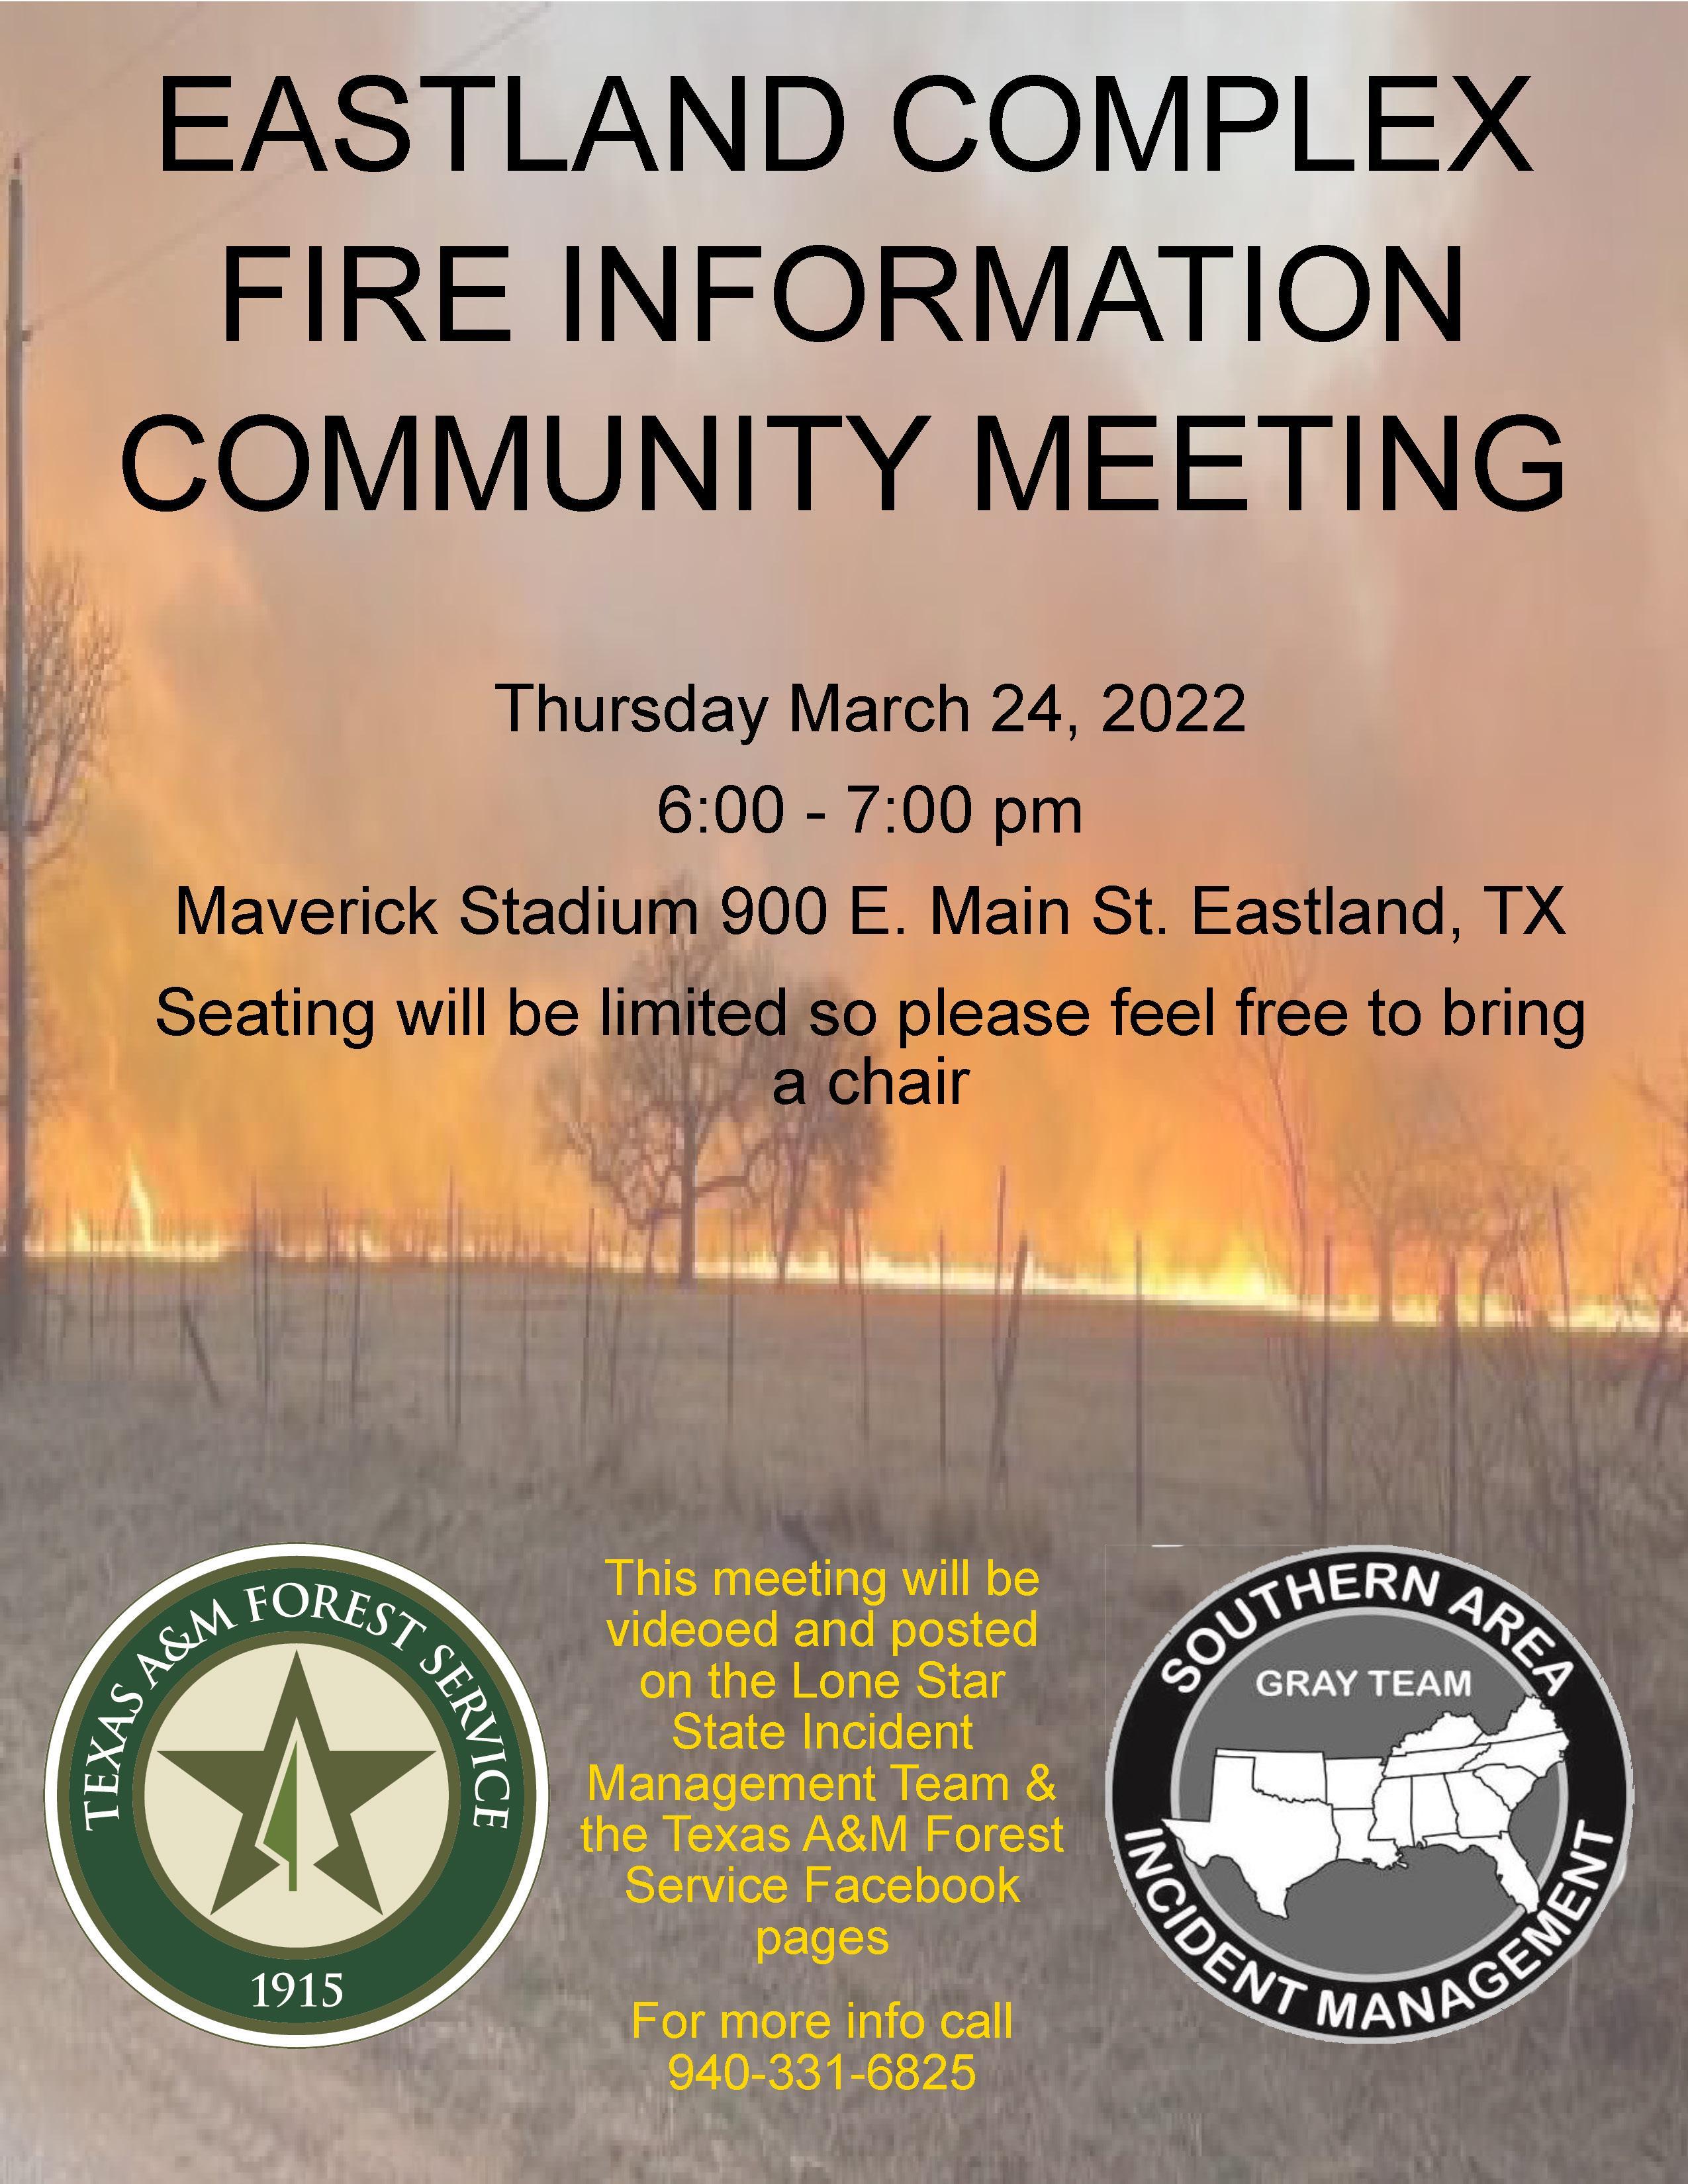 There will be a Community Meeting on March 24th from 6-7pm. The meeting will be located at Maverick Stadium in Eastland, TX and posted on Facebook at a later time.